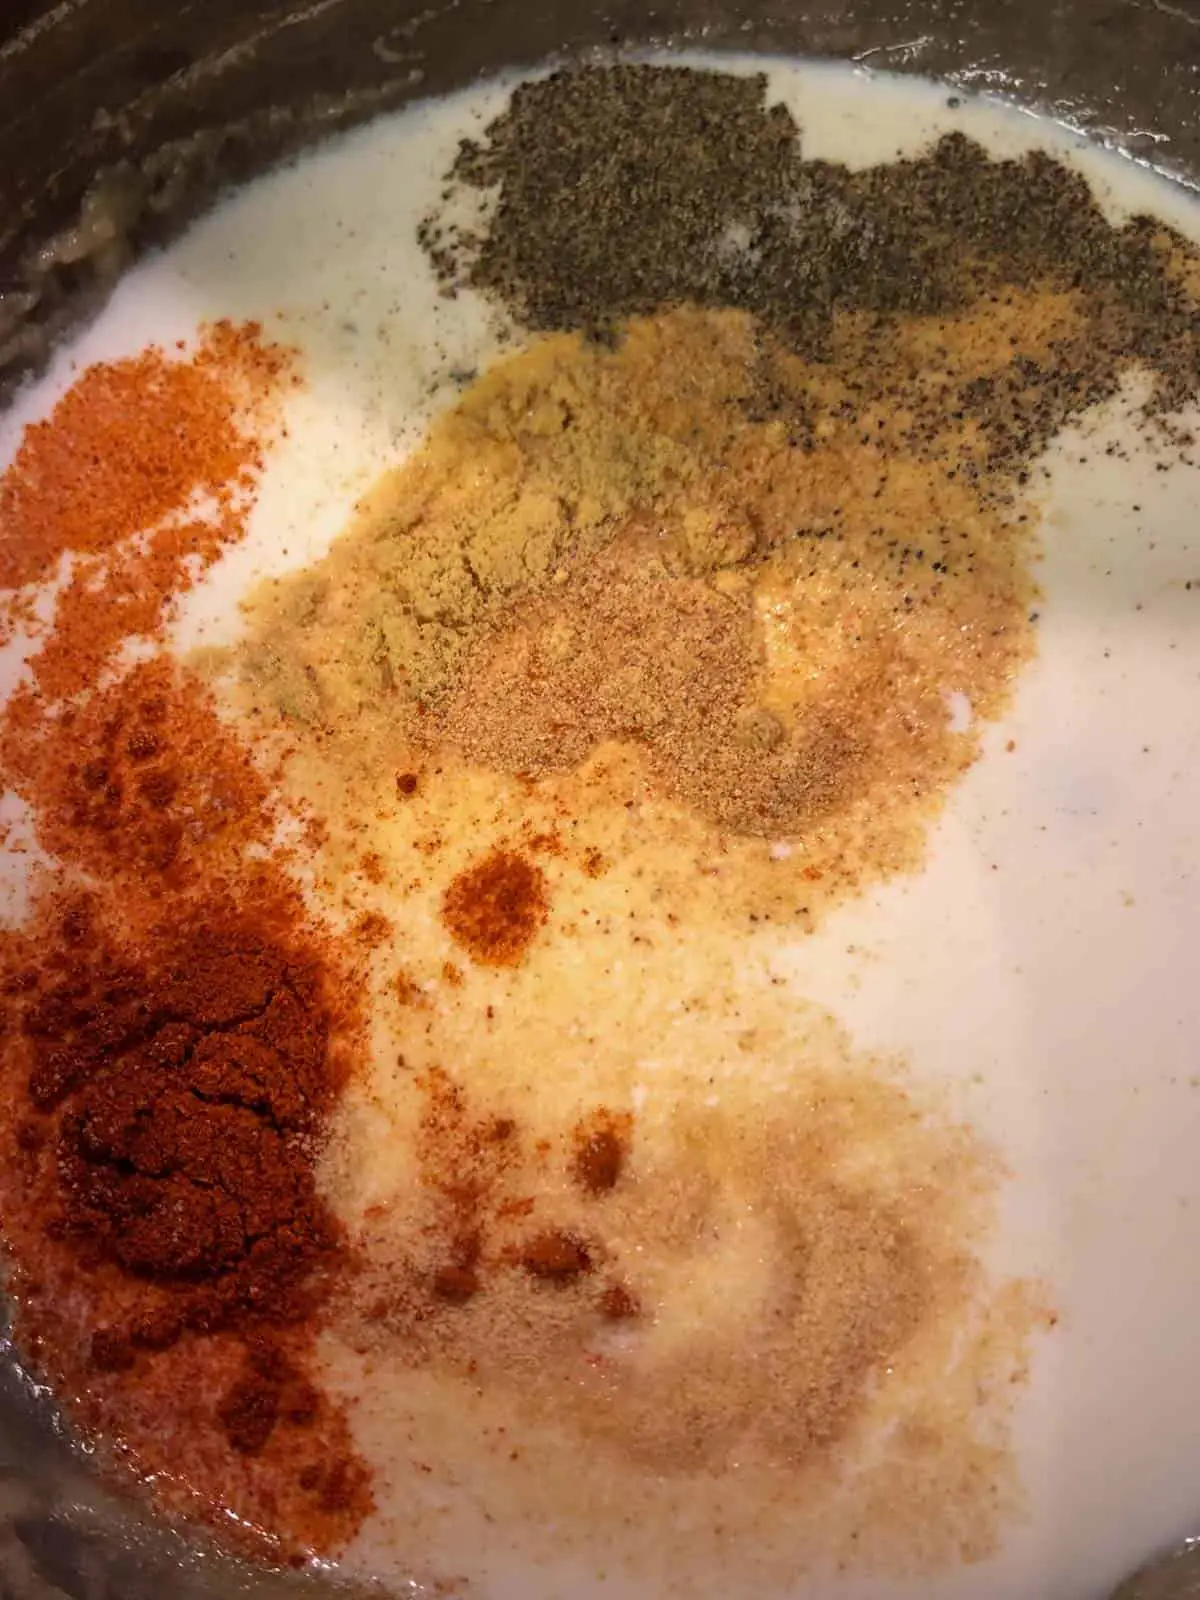 Cream in a saucepan with various spices added to it including salt, pepper, cayenne pepper, onion powder, garlic powder, and dry mustard.